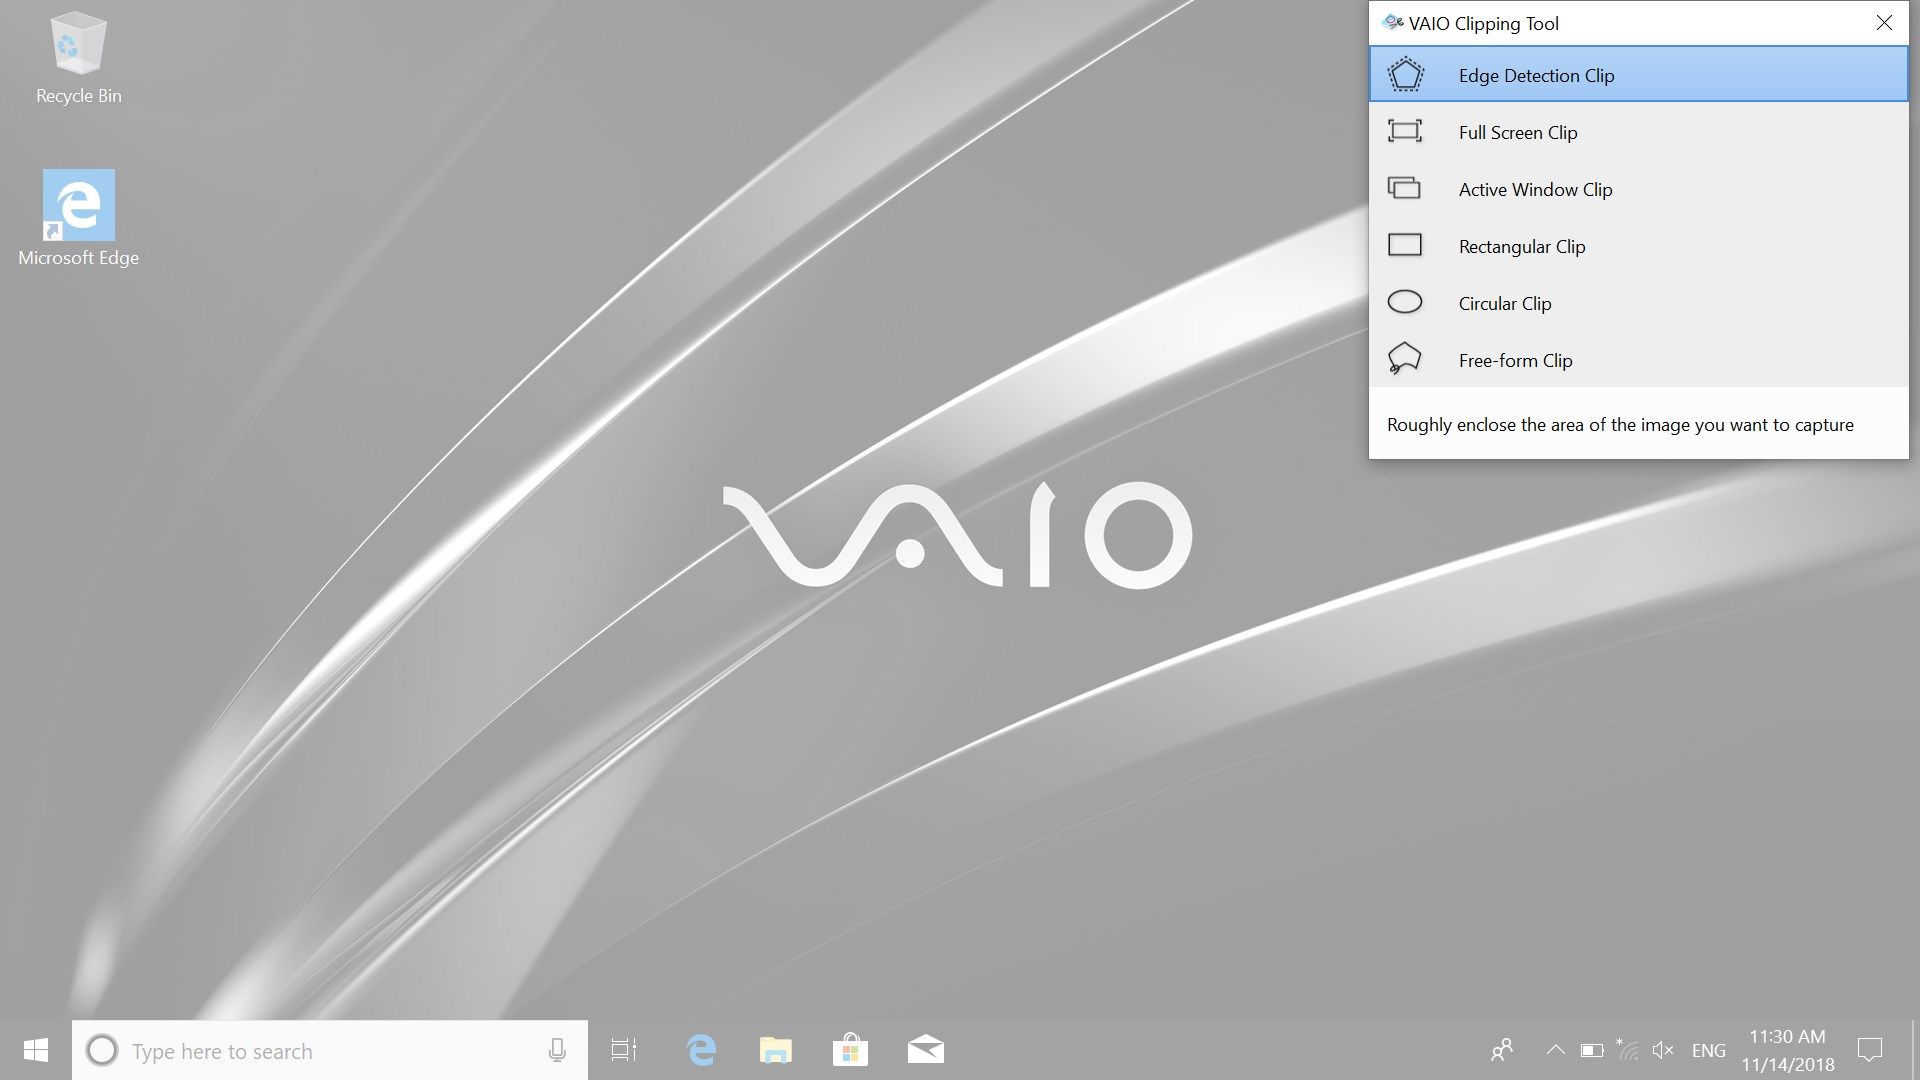 VAIO Clipping Tool